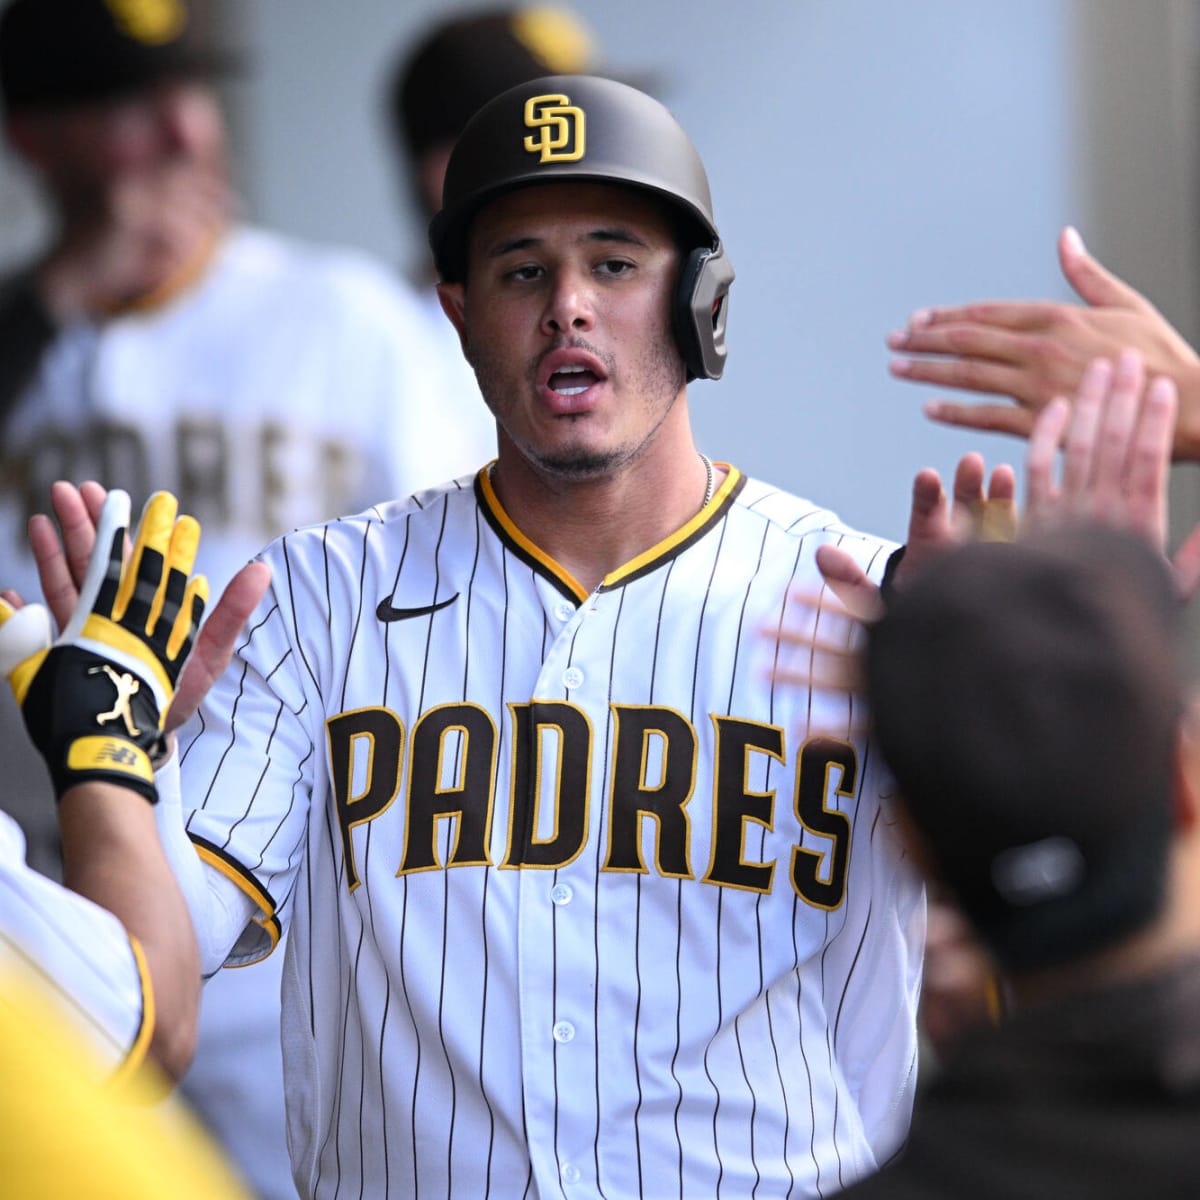 Manny Machado reacts to criticism and concerns about the San Diego Padres